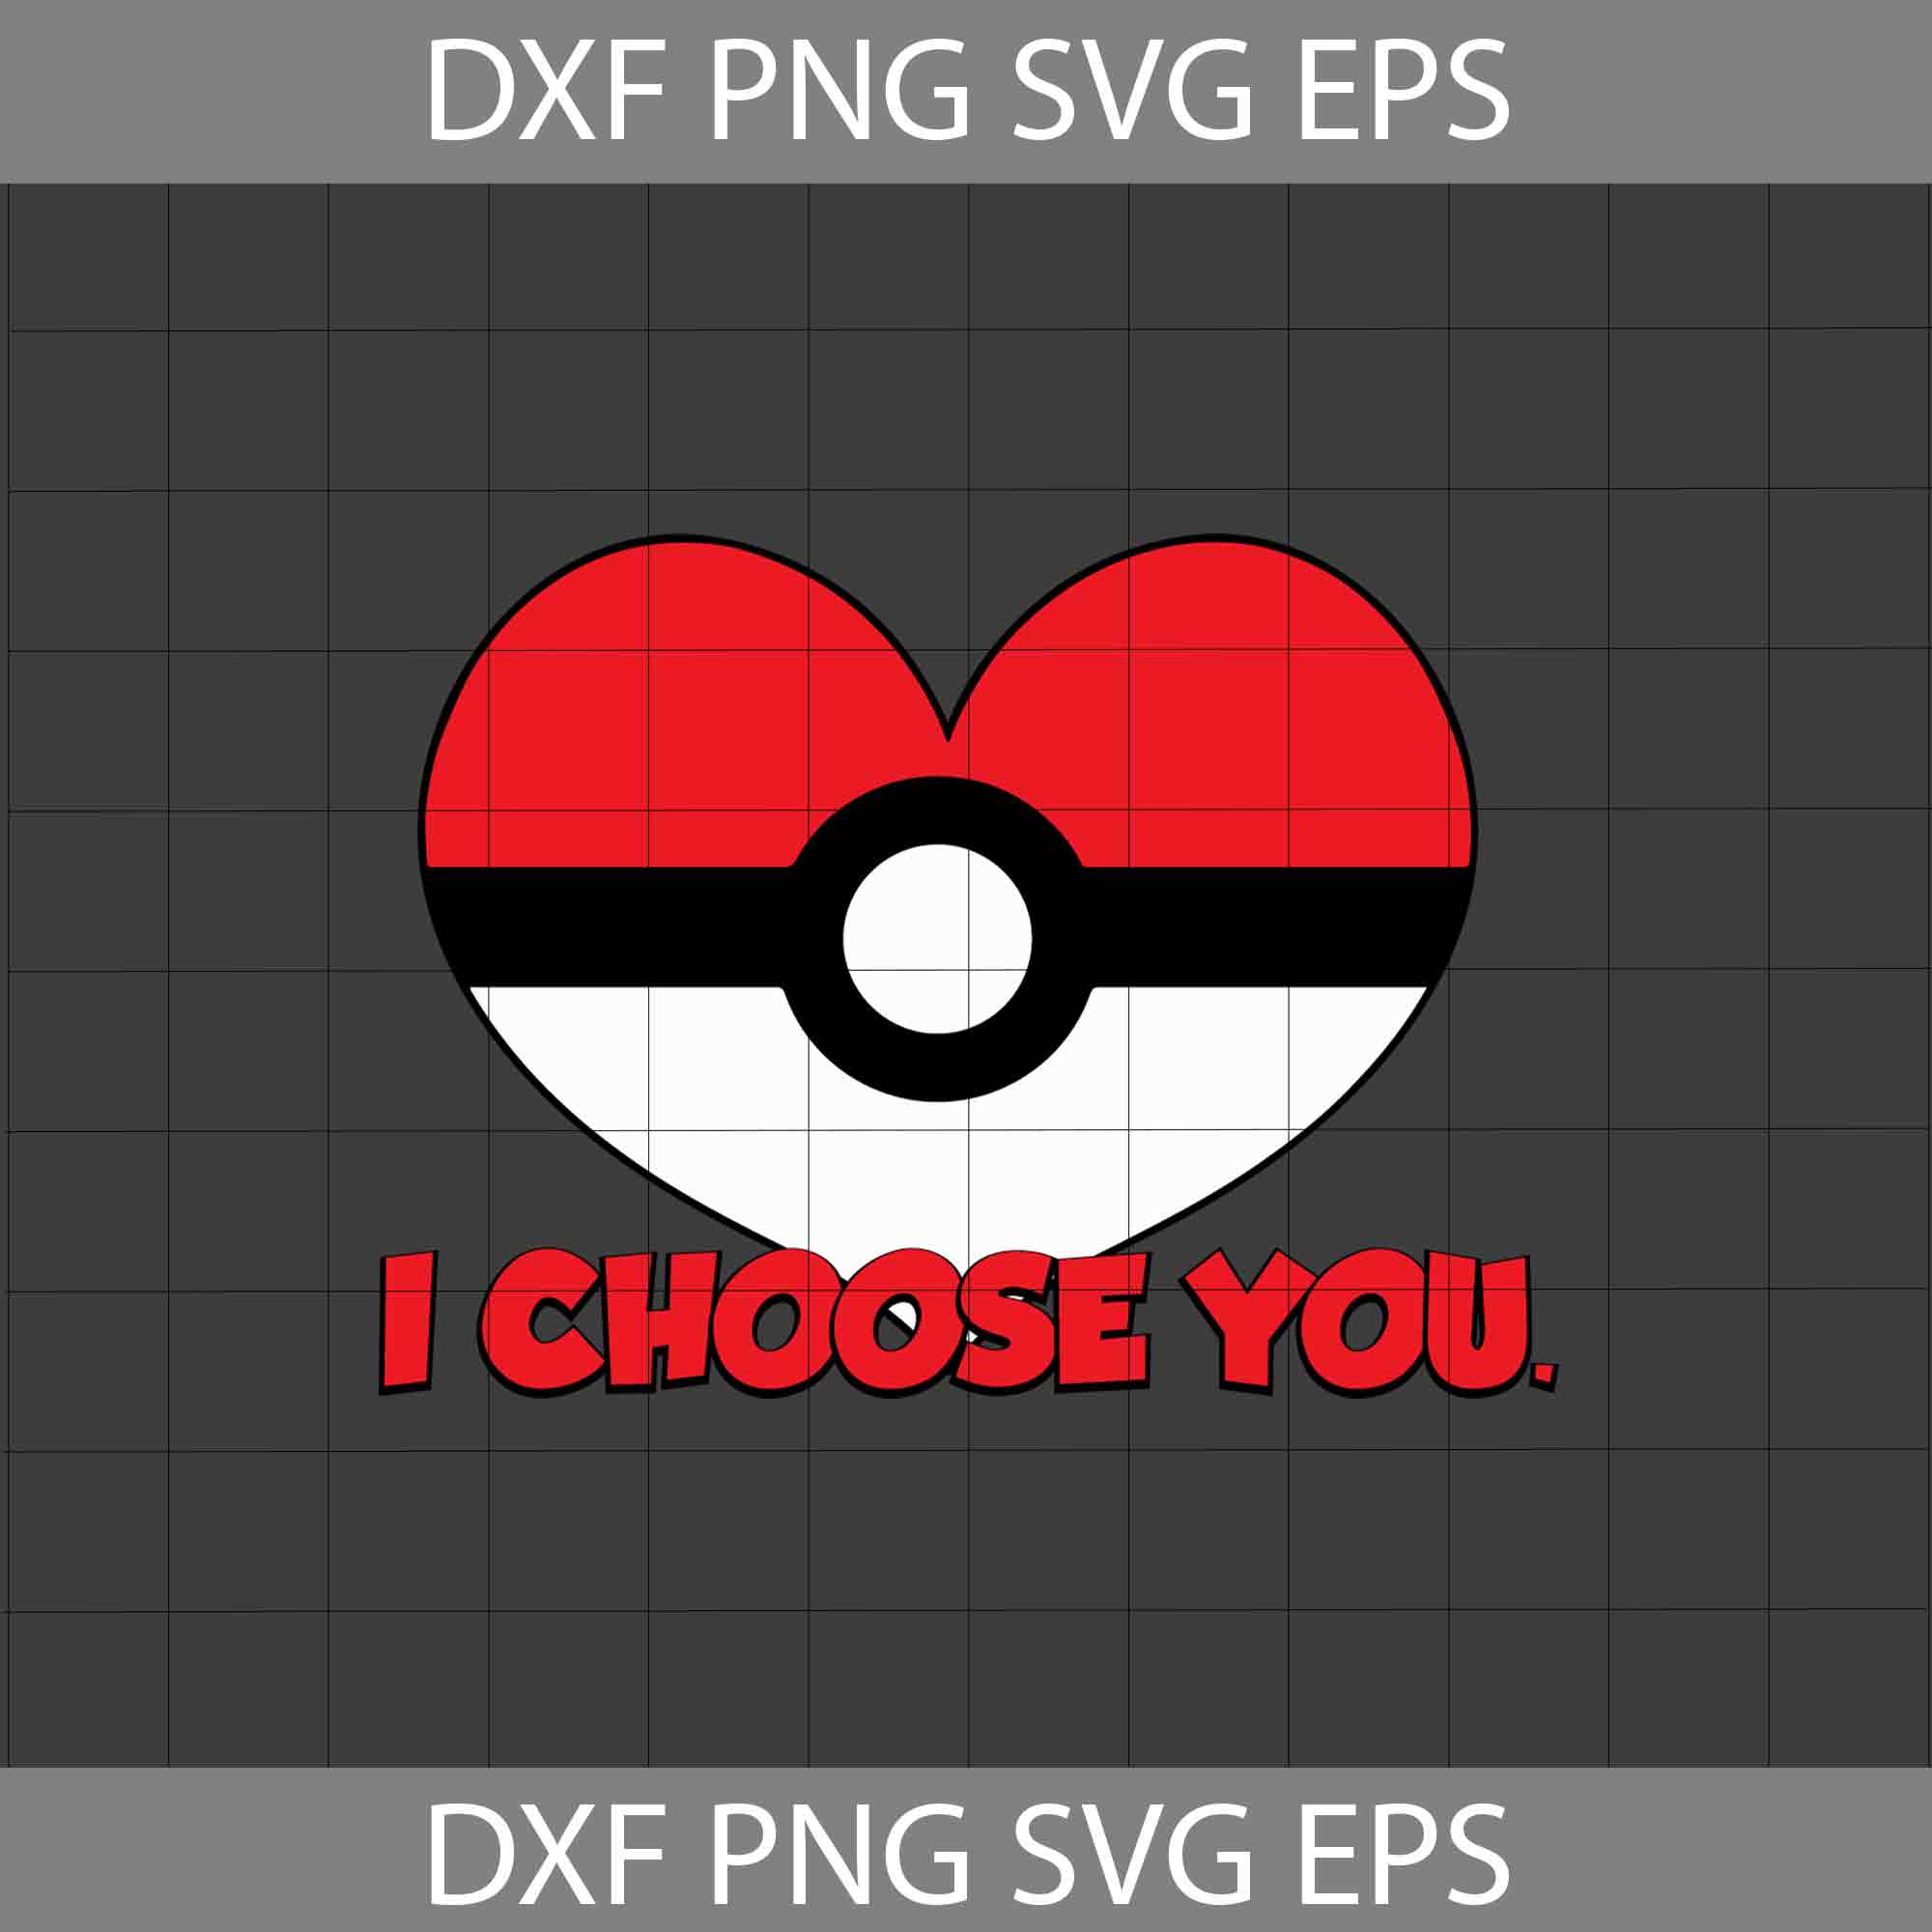 Pokeball PNG Transparent Images Free Download - Pngfre